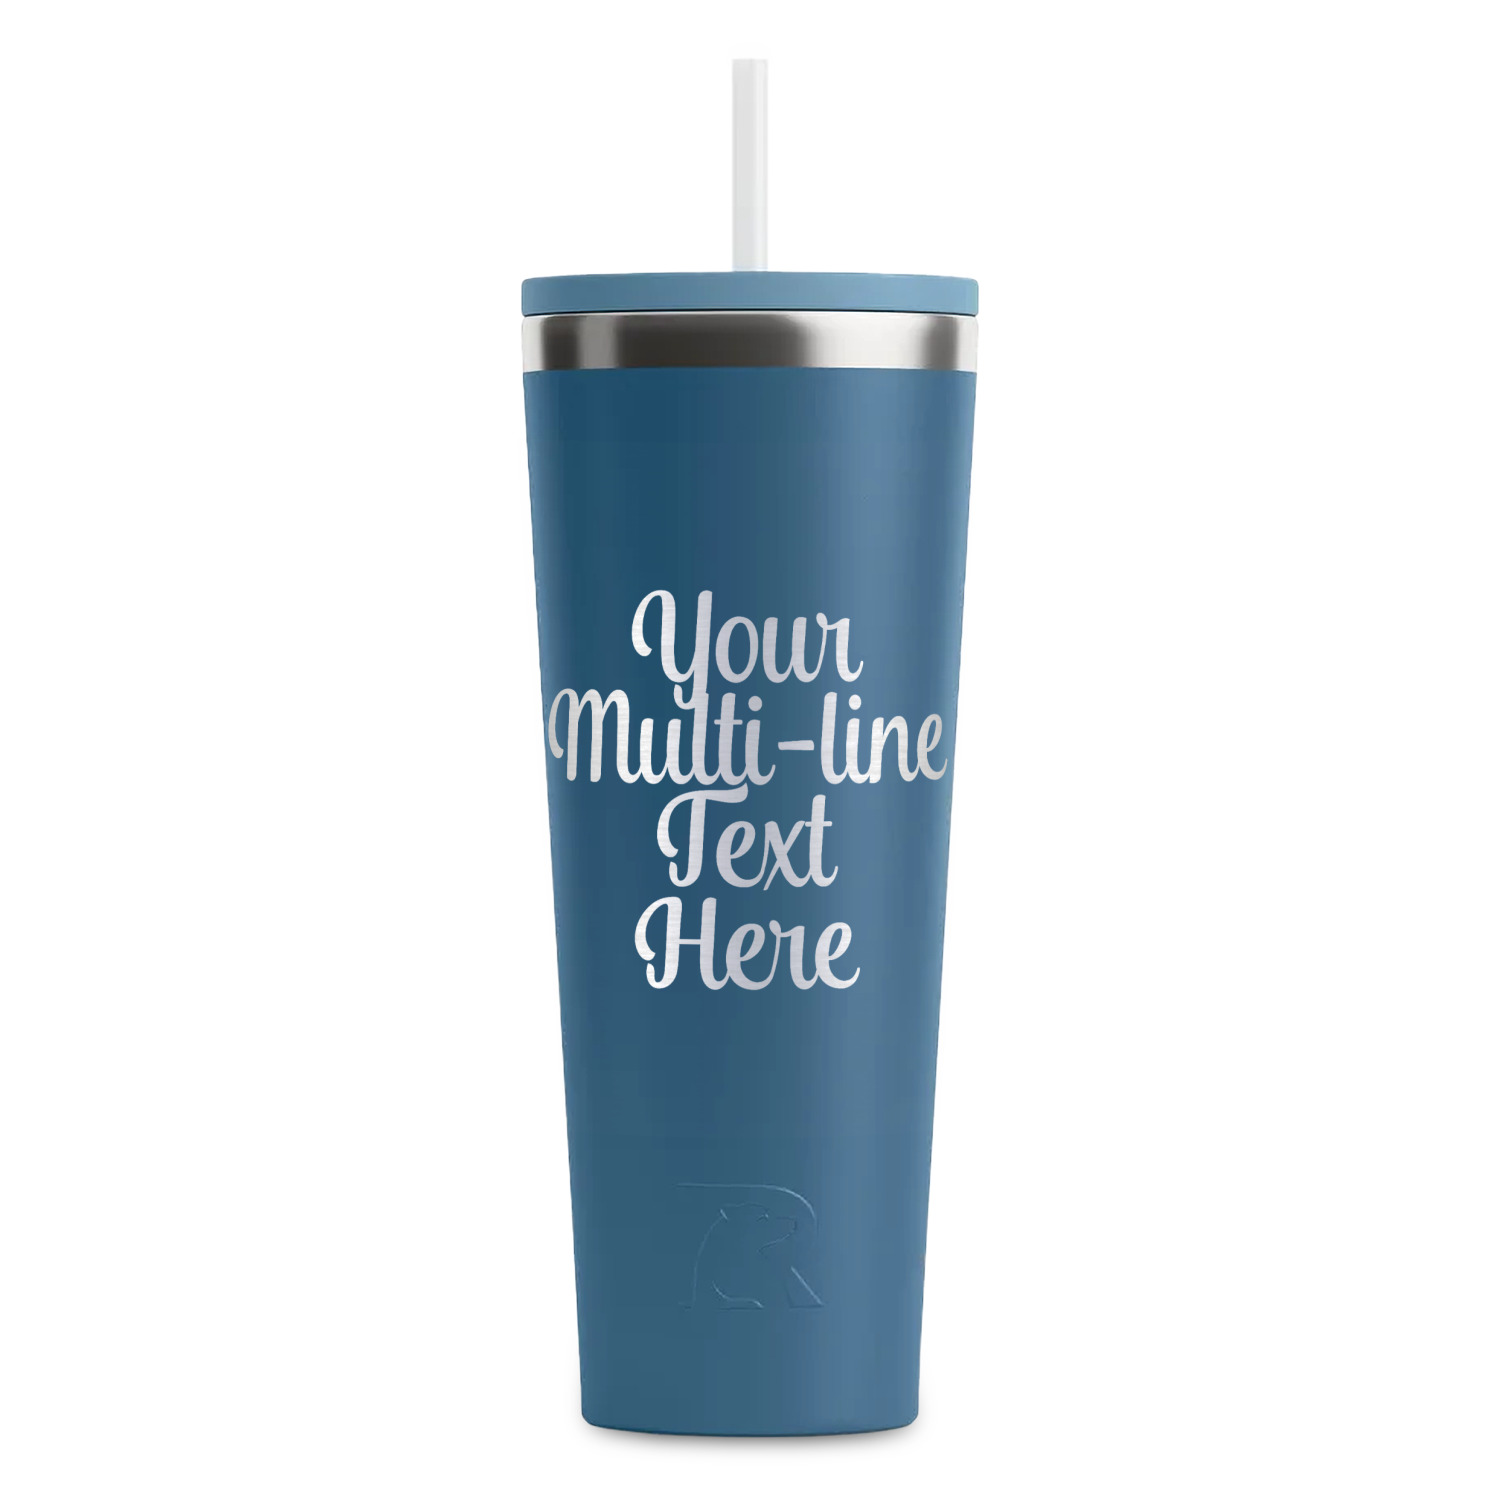 https://www.youcustomizeit.com/common/MAKE/837471/Multiline-Text-Steel-Blue-RTIC-Everyday-Tumbler-28-oz-Front.jpg?lm=1698259271